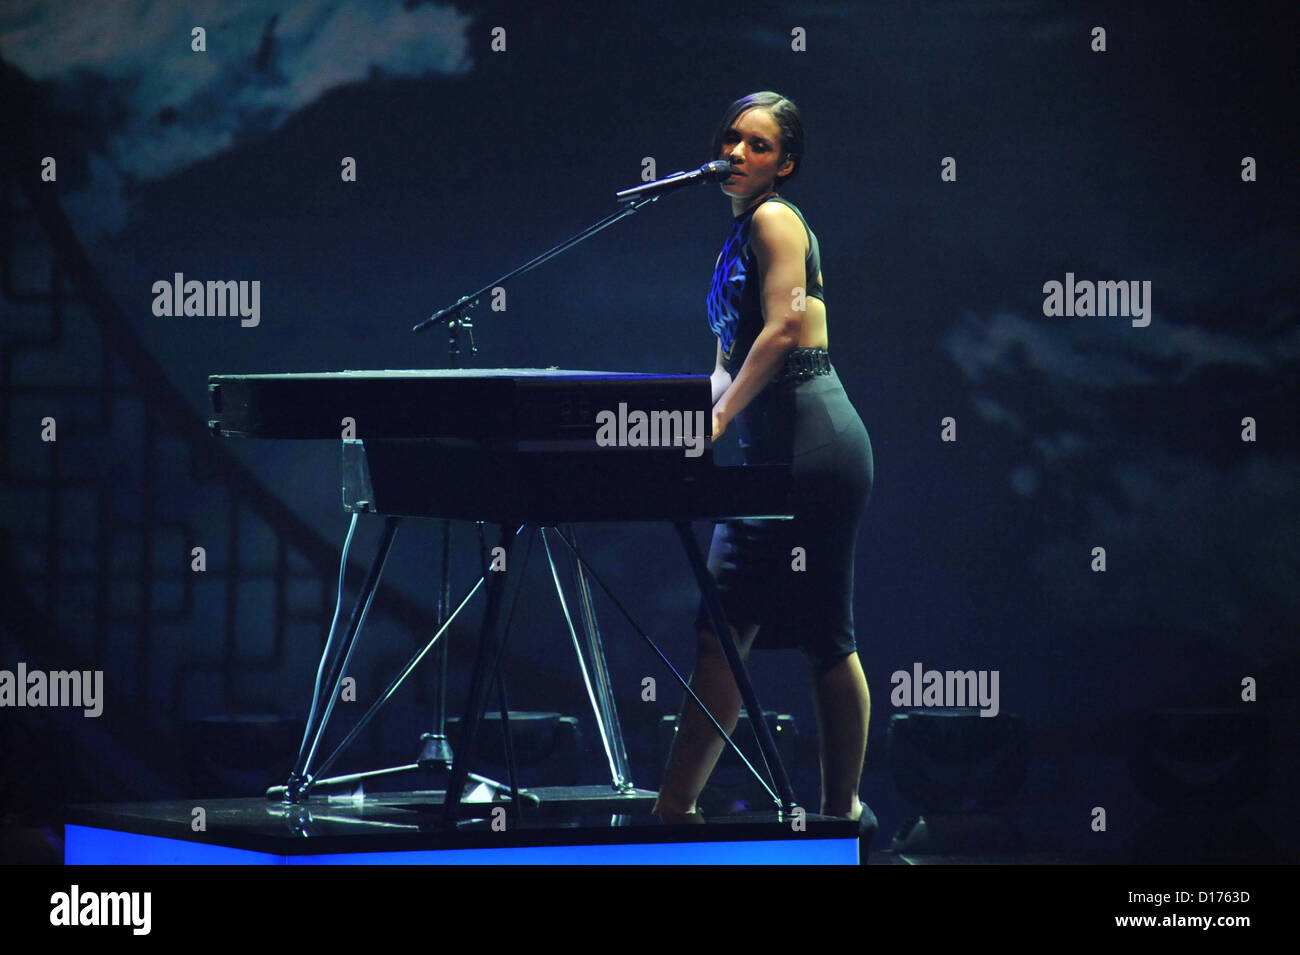 Singer Alicia Keys performing at the 'Wetten dass...?' Show in Freiburg, Germany. 08.12.2012 Stock Photo